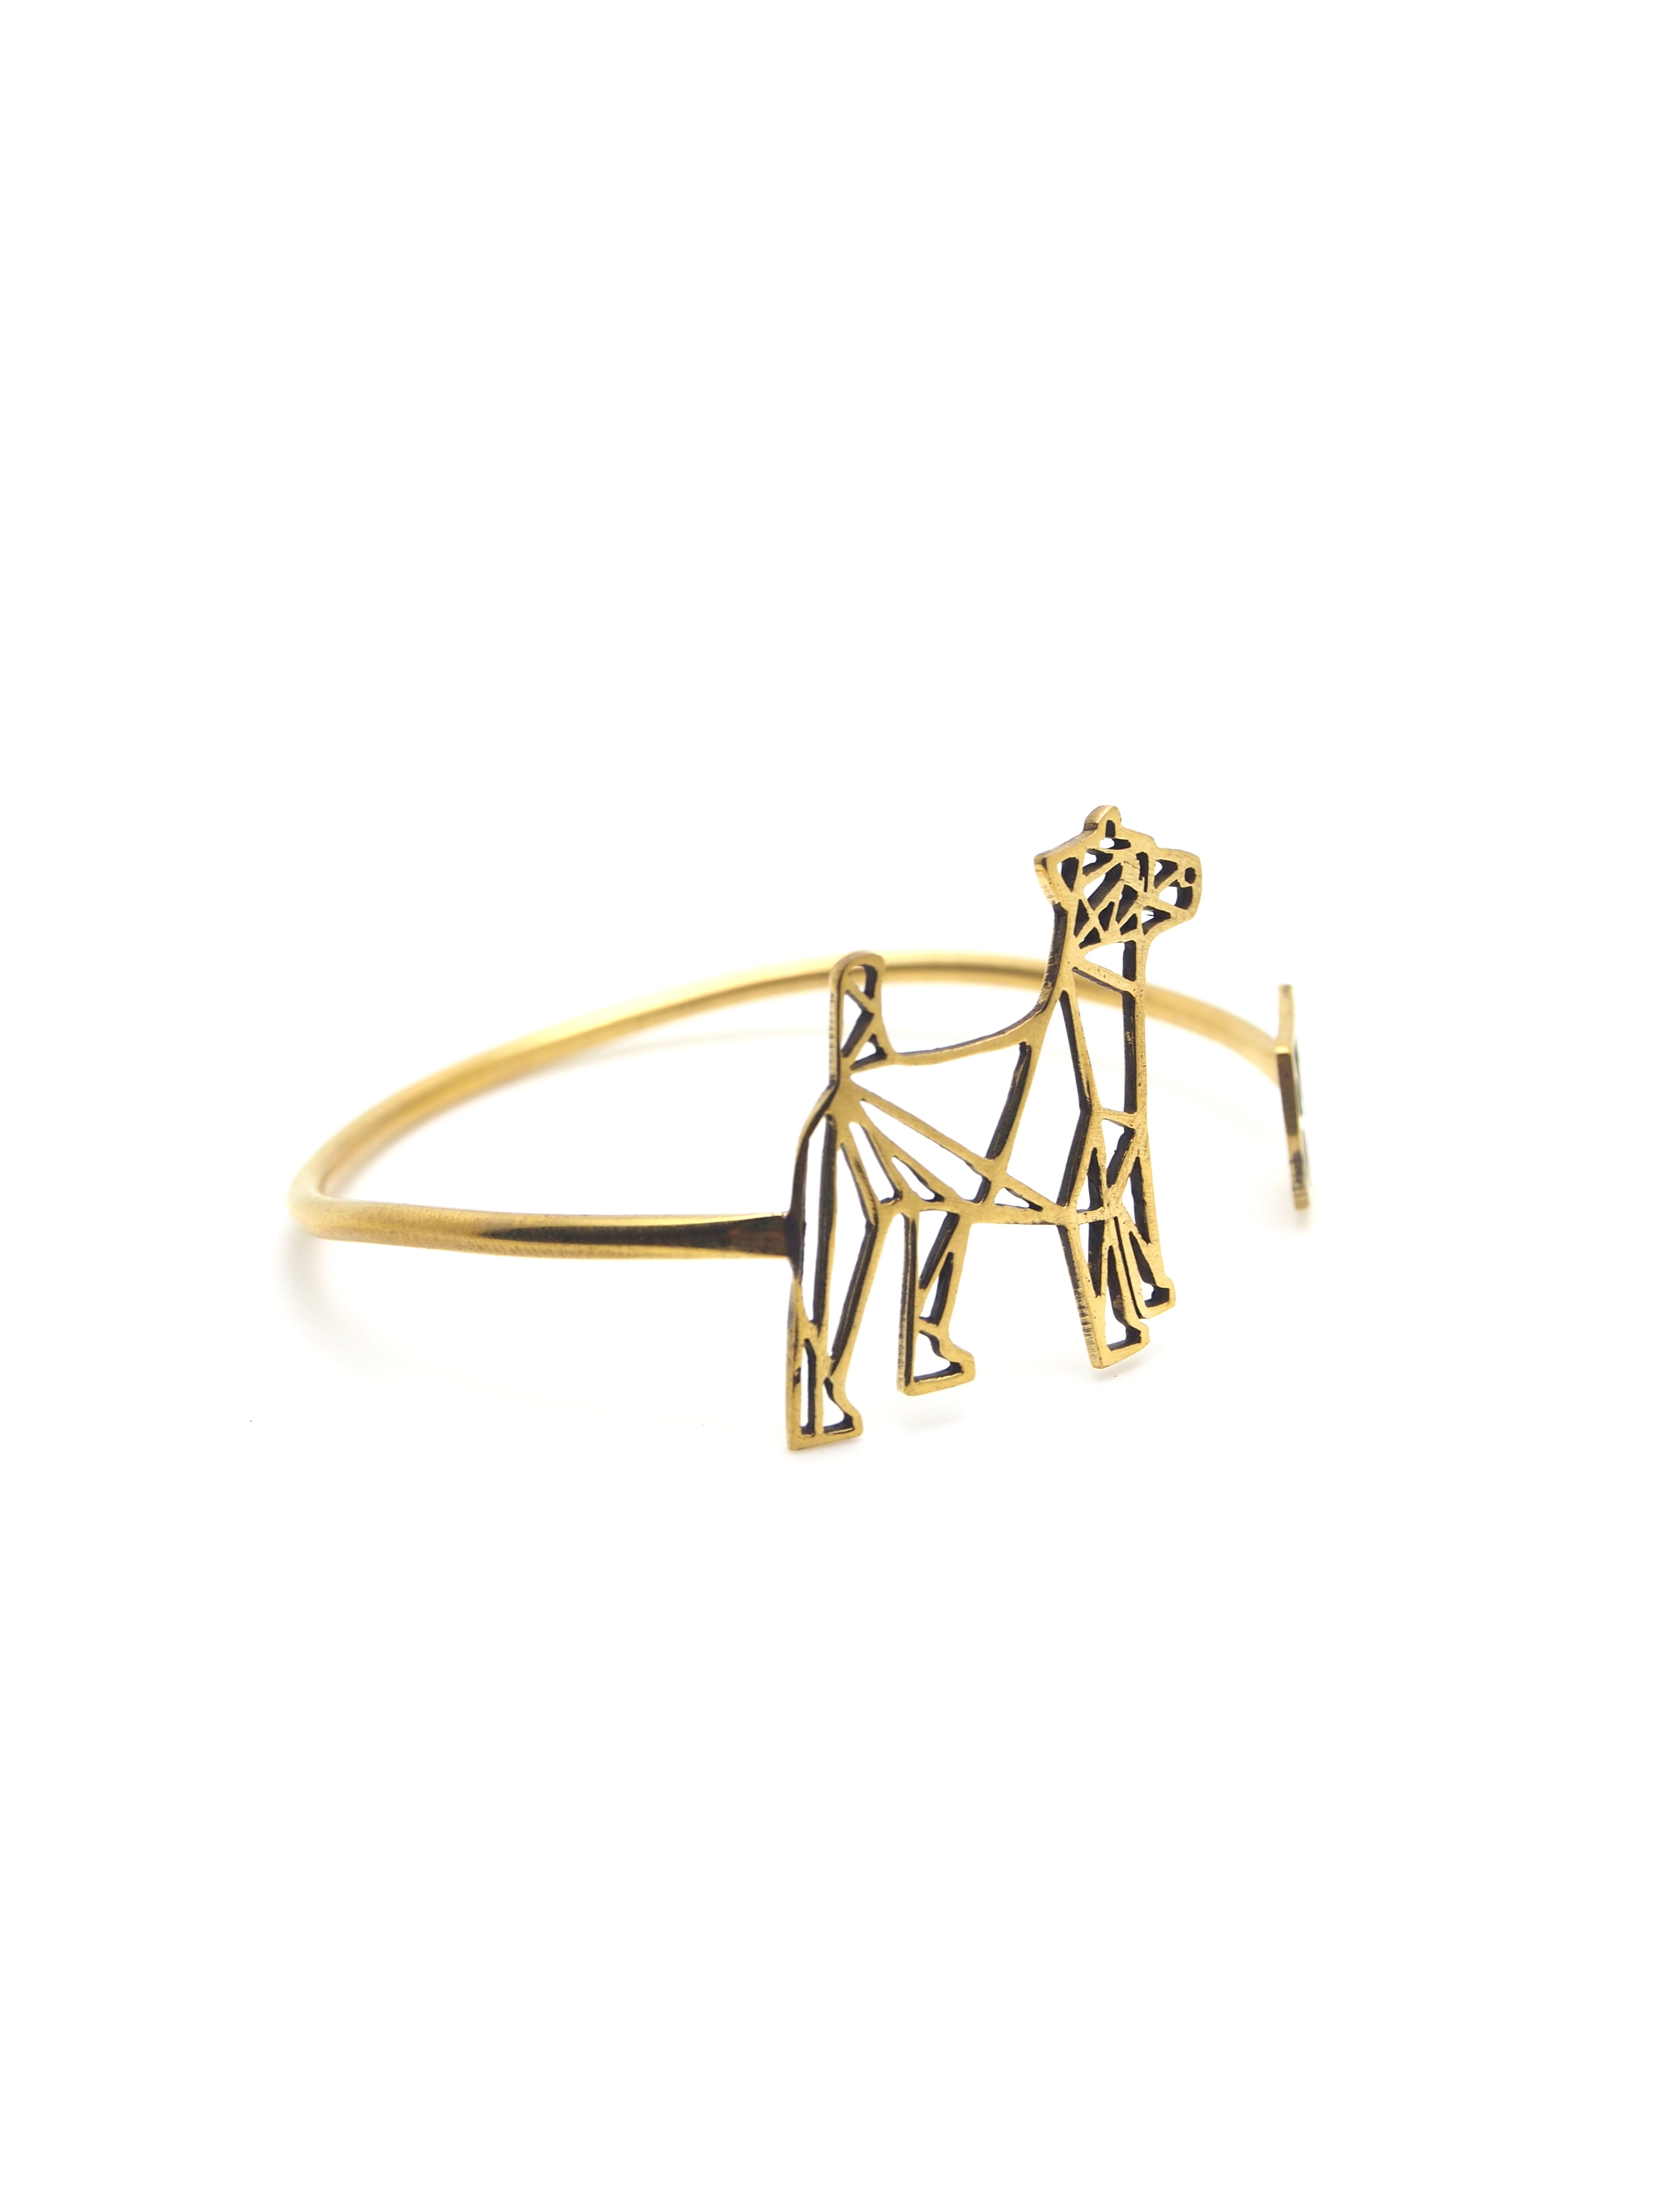 Hansel & Smith - Jack Russell Terrier Bangle